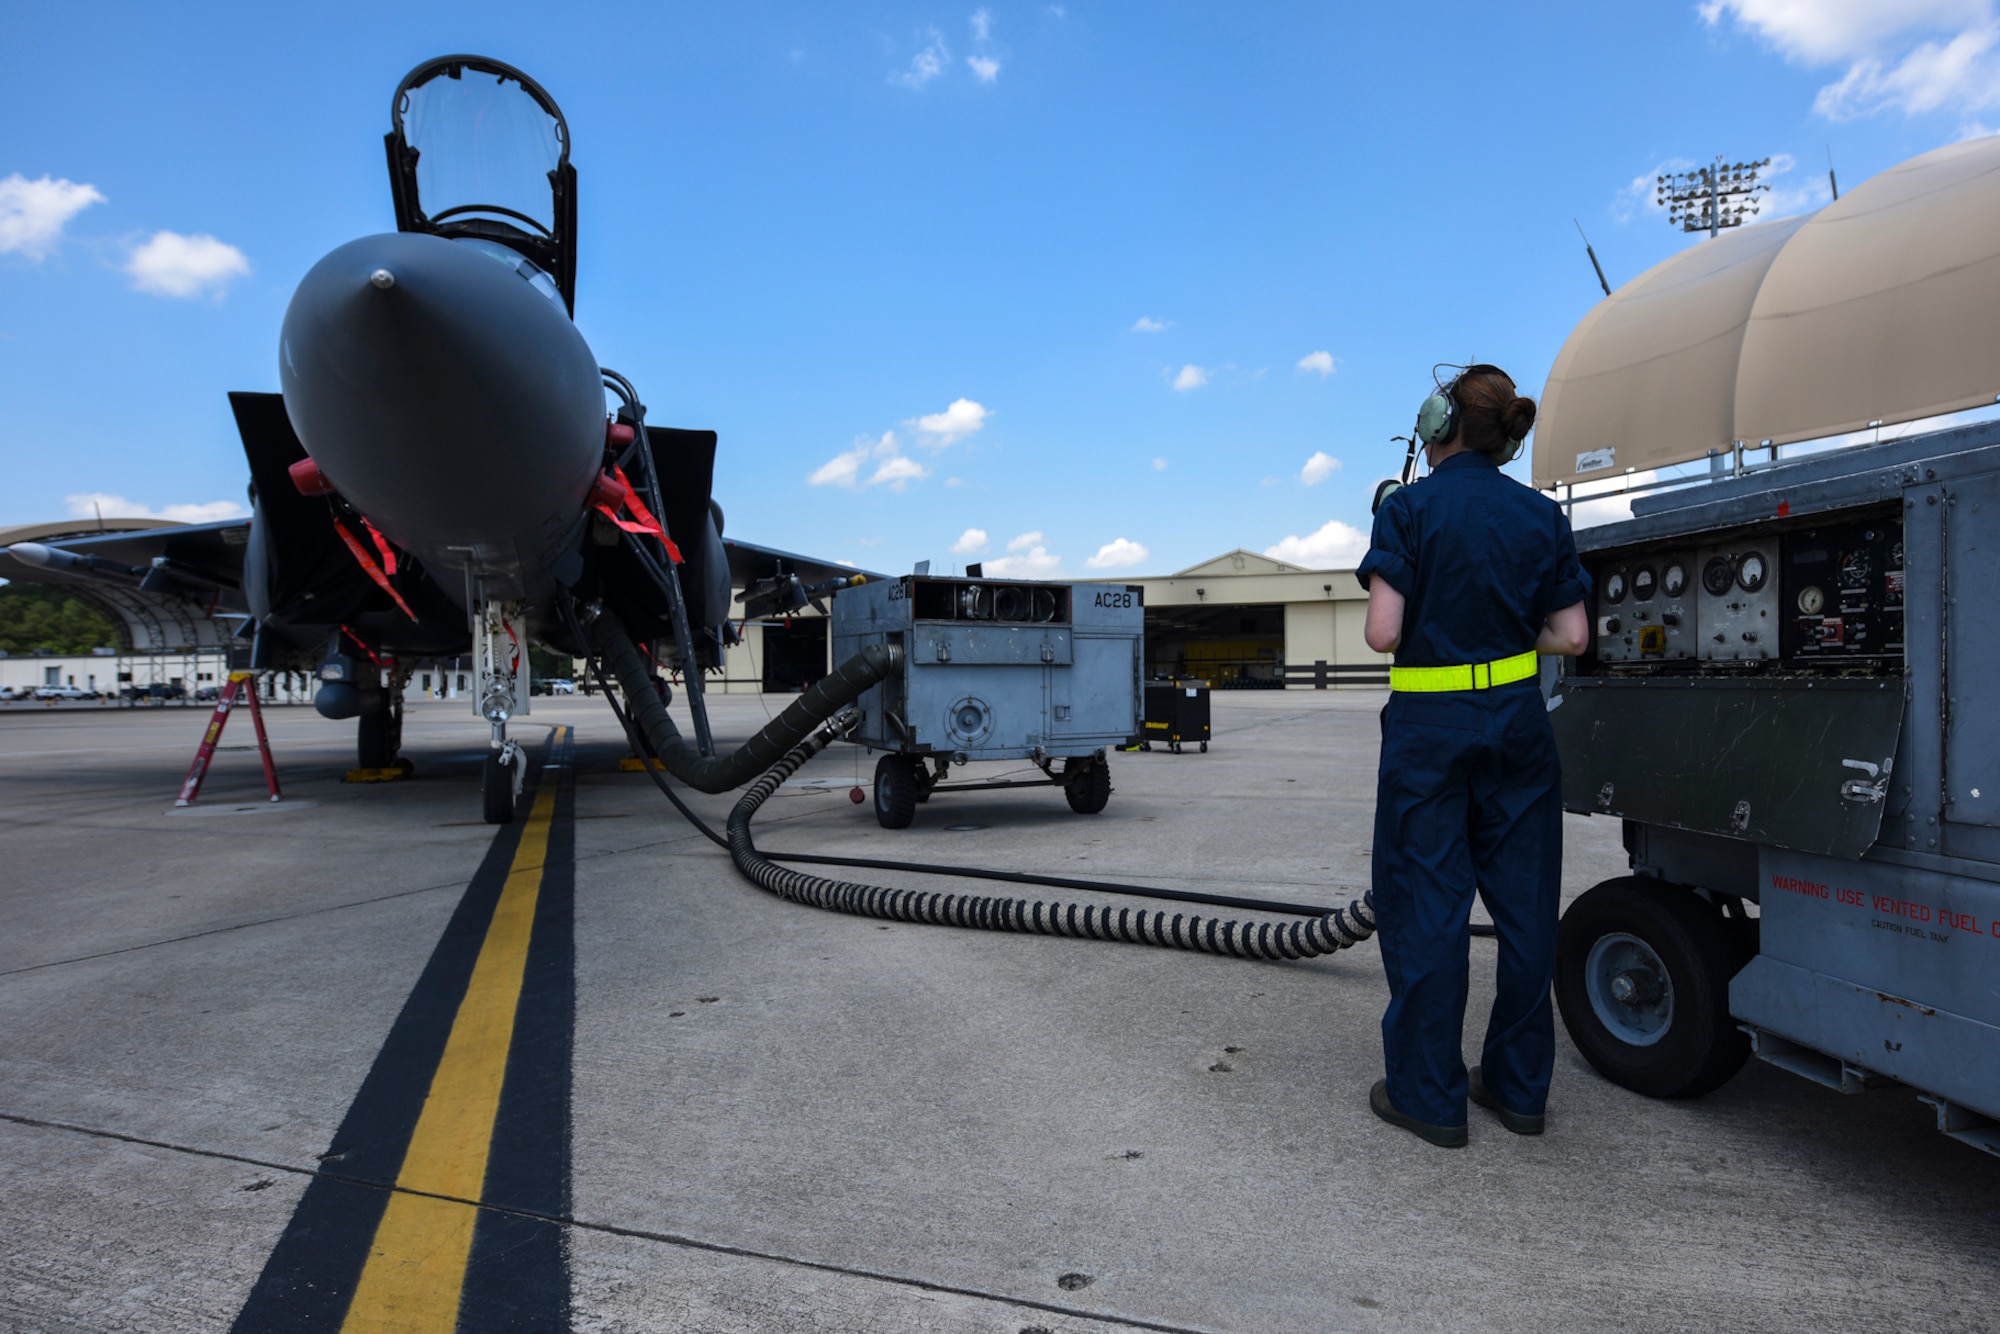 Airman 1st Class Bailey O’Dell, 4th Aircraft Maintenance Squadron armaments systems technician, runs maintenance on an F-15E Strike Eagle, April 26, 2016, at Seymour Johnson Air Force Base, North Carolina. In preparation for exercise Combat Hammer, Airmen from the 4th AMXS prepped jets to participate in the two-week exercise. (U.S. Air Force photo by Airman Shawna L. Keyes/Released)